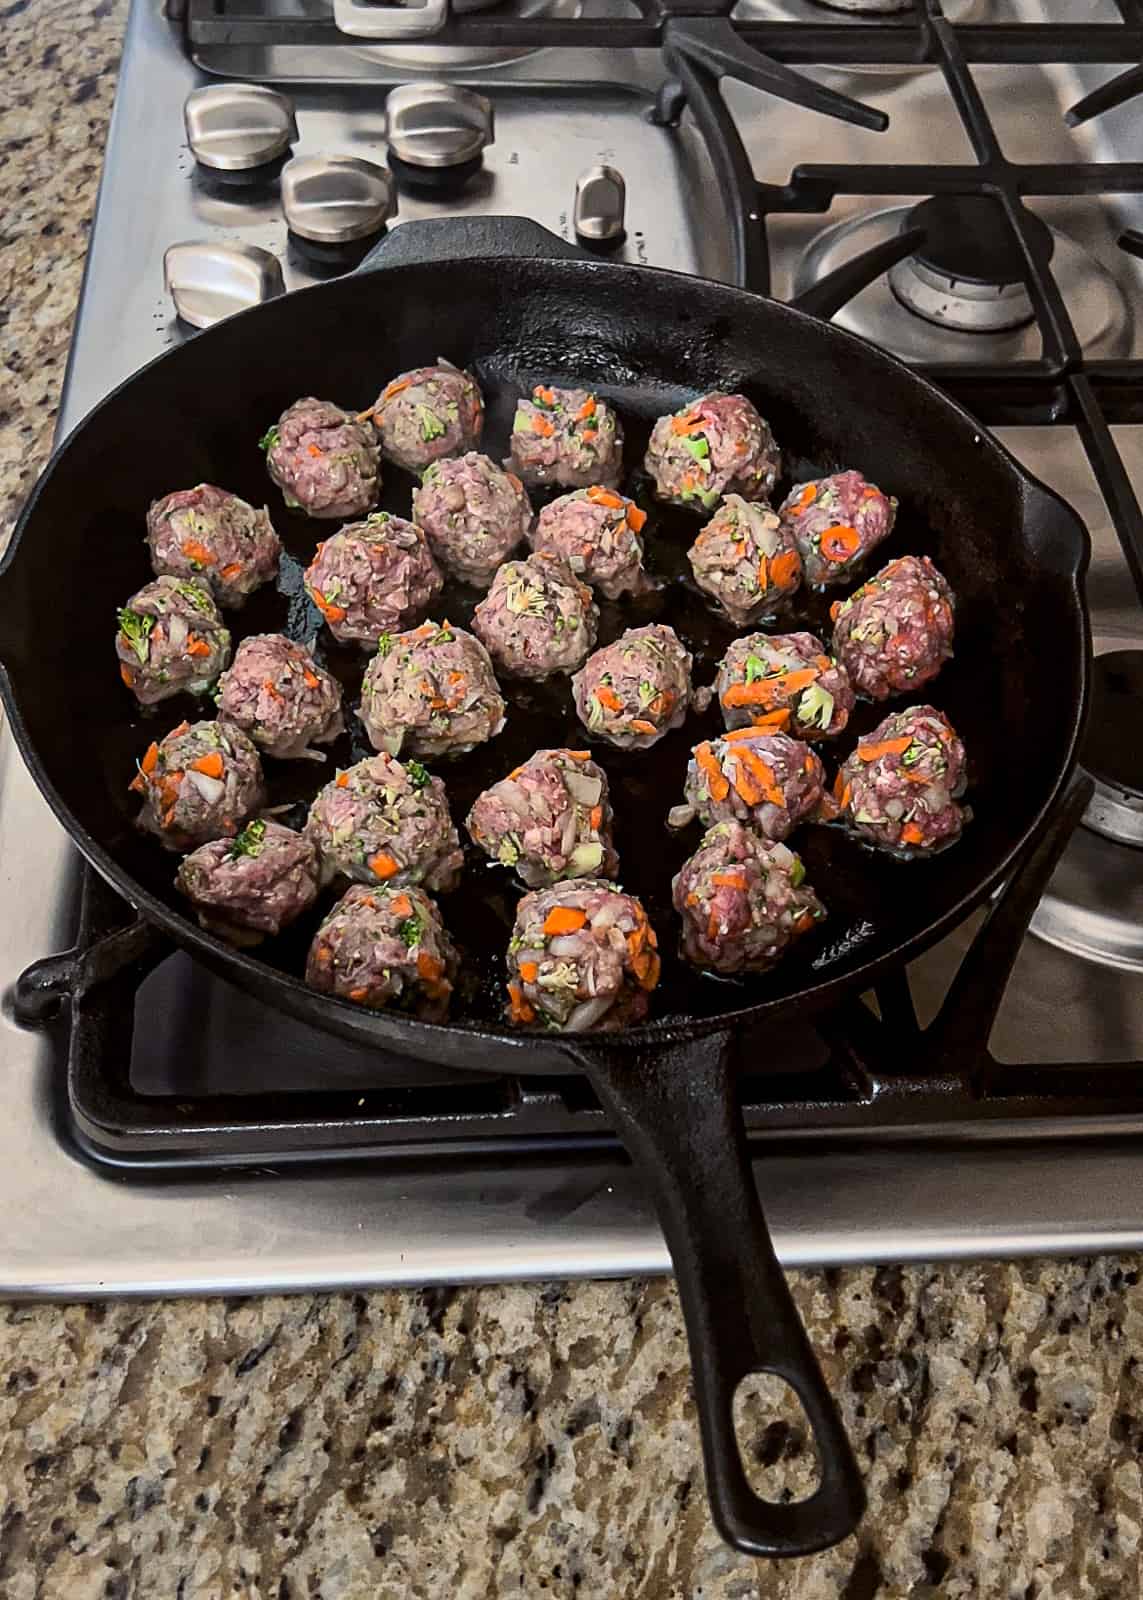 Browning vegetable and ground beef meatballs on the stove